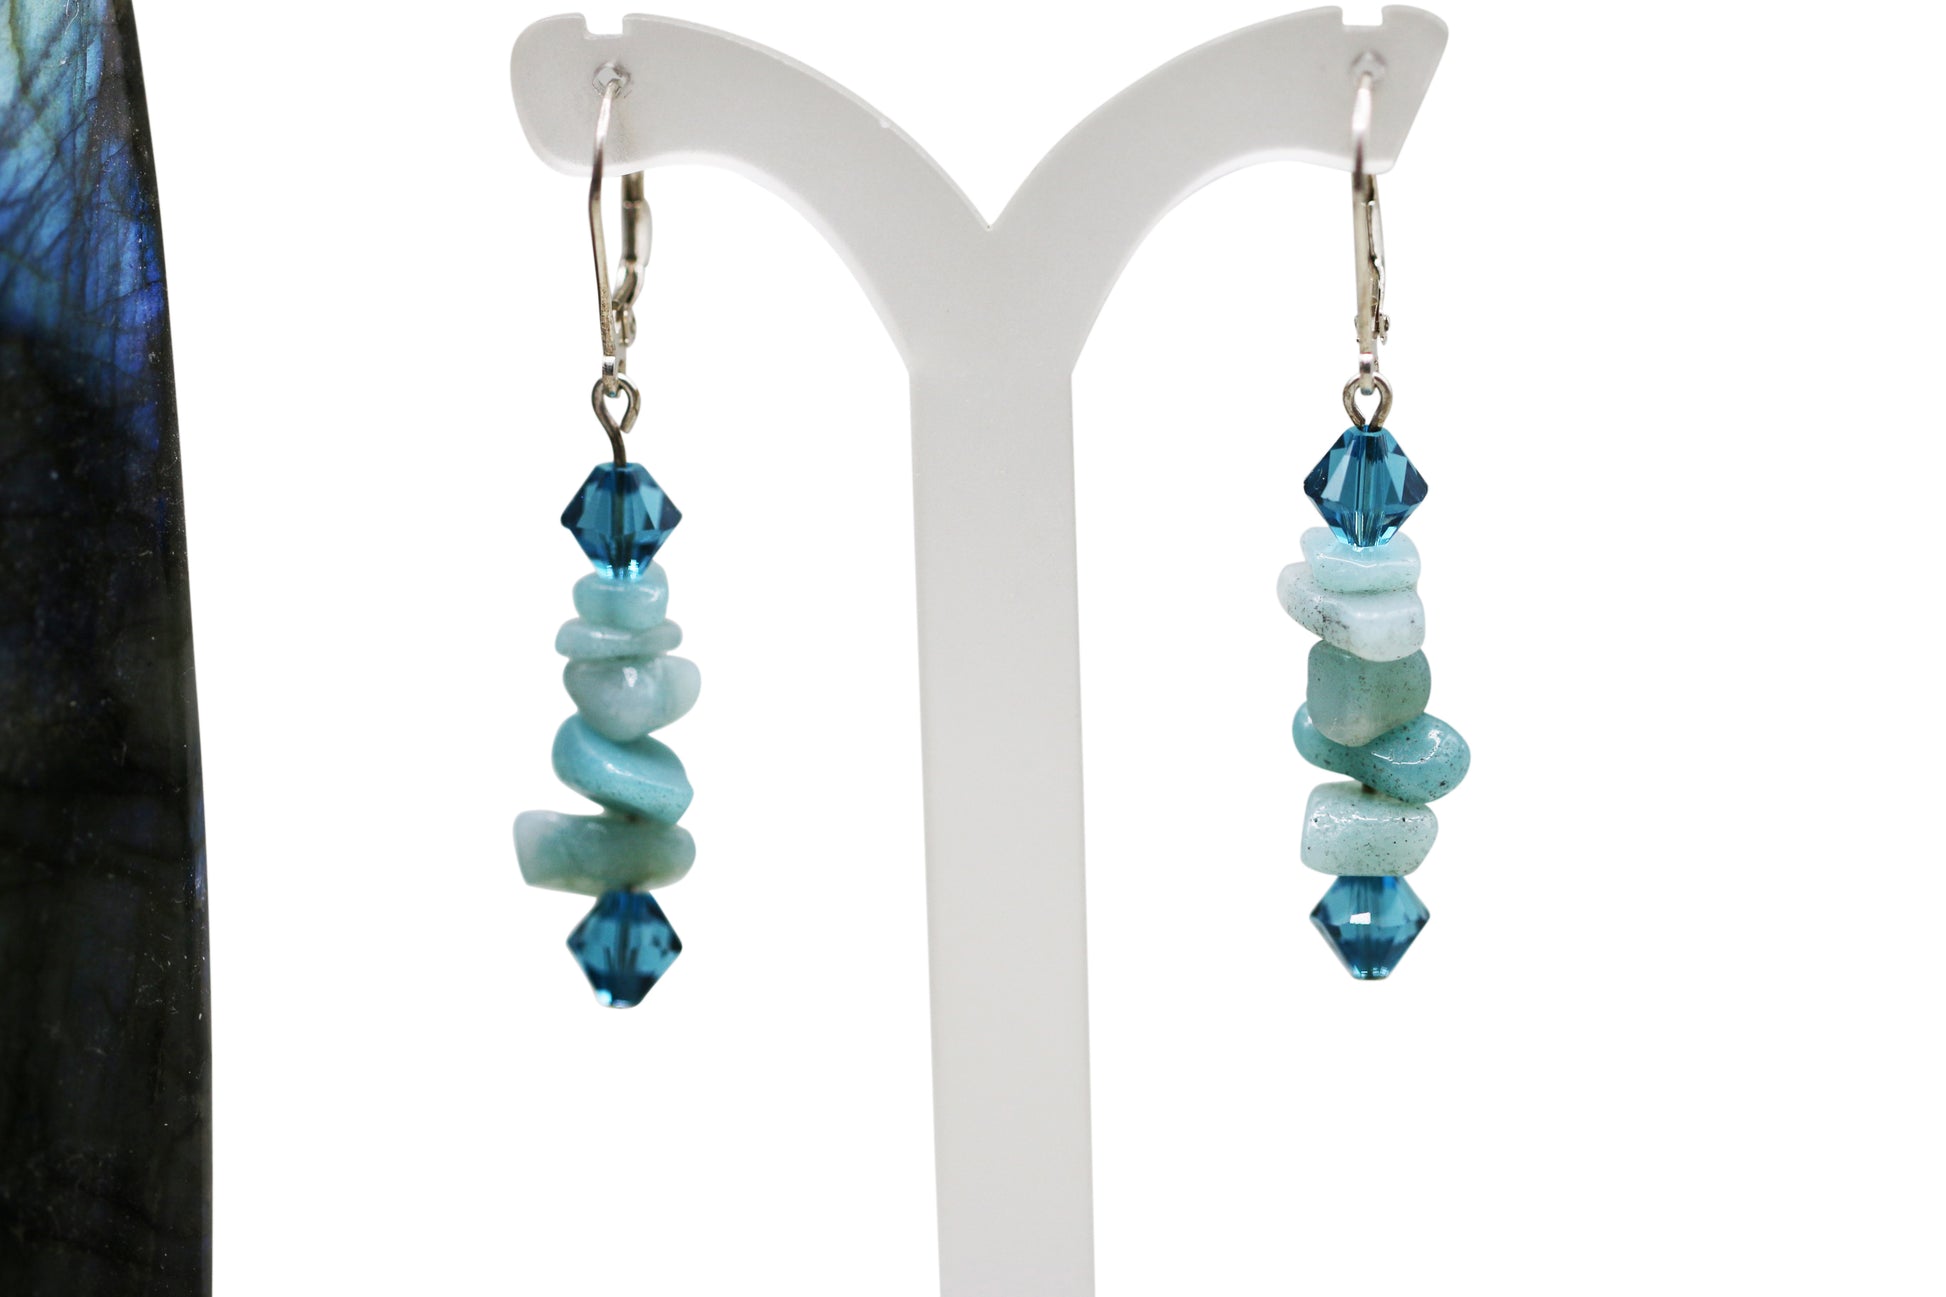 Amazonite Natural Gemstone Chips Sterling Silver Leverback Earrings with Turquoise Austrian Crystals - Annabel's Jewelry & Leather